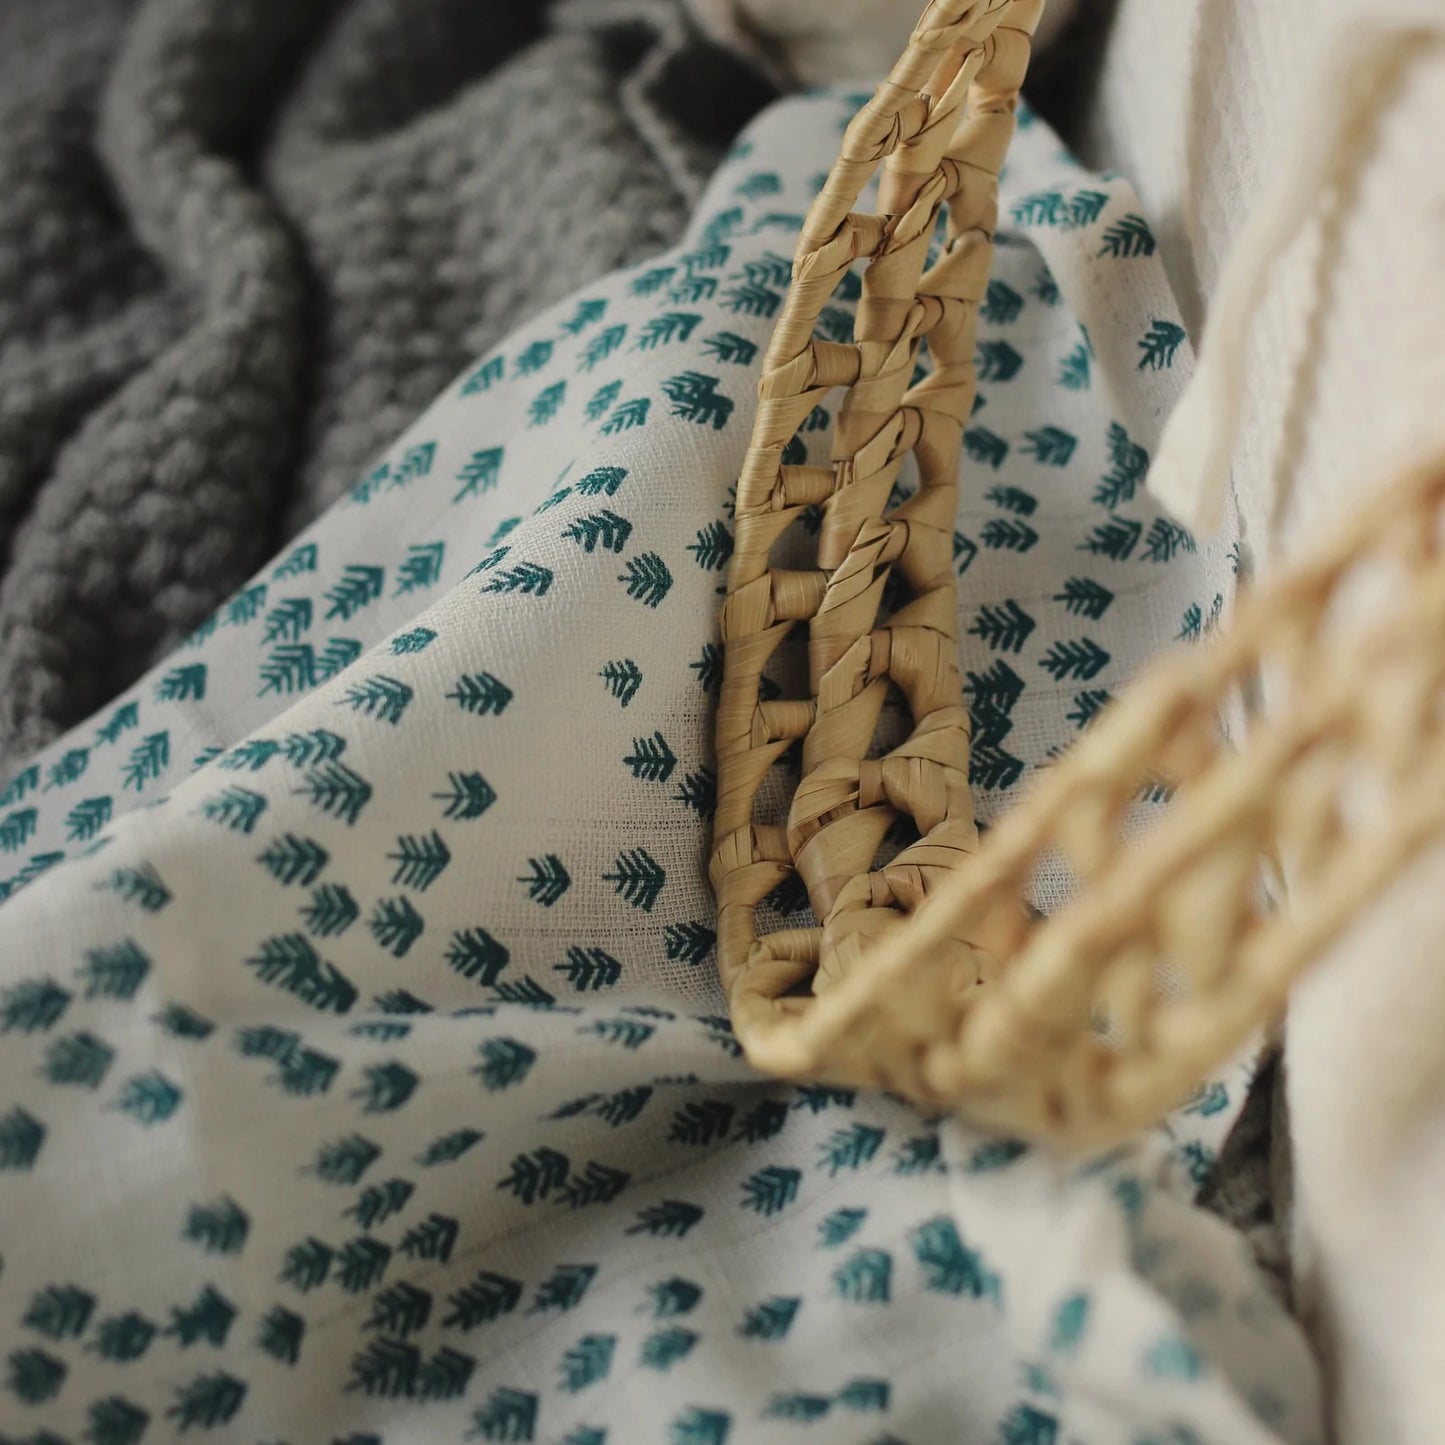 Large Organic Muslin cloth | Swaddle | Nordic Forest